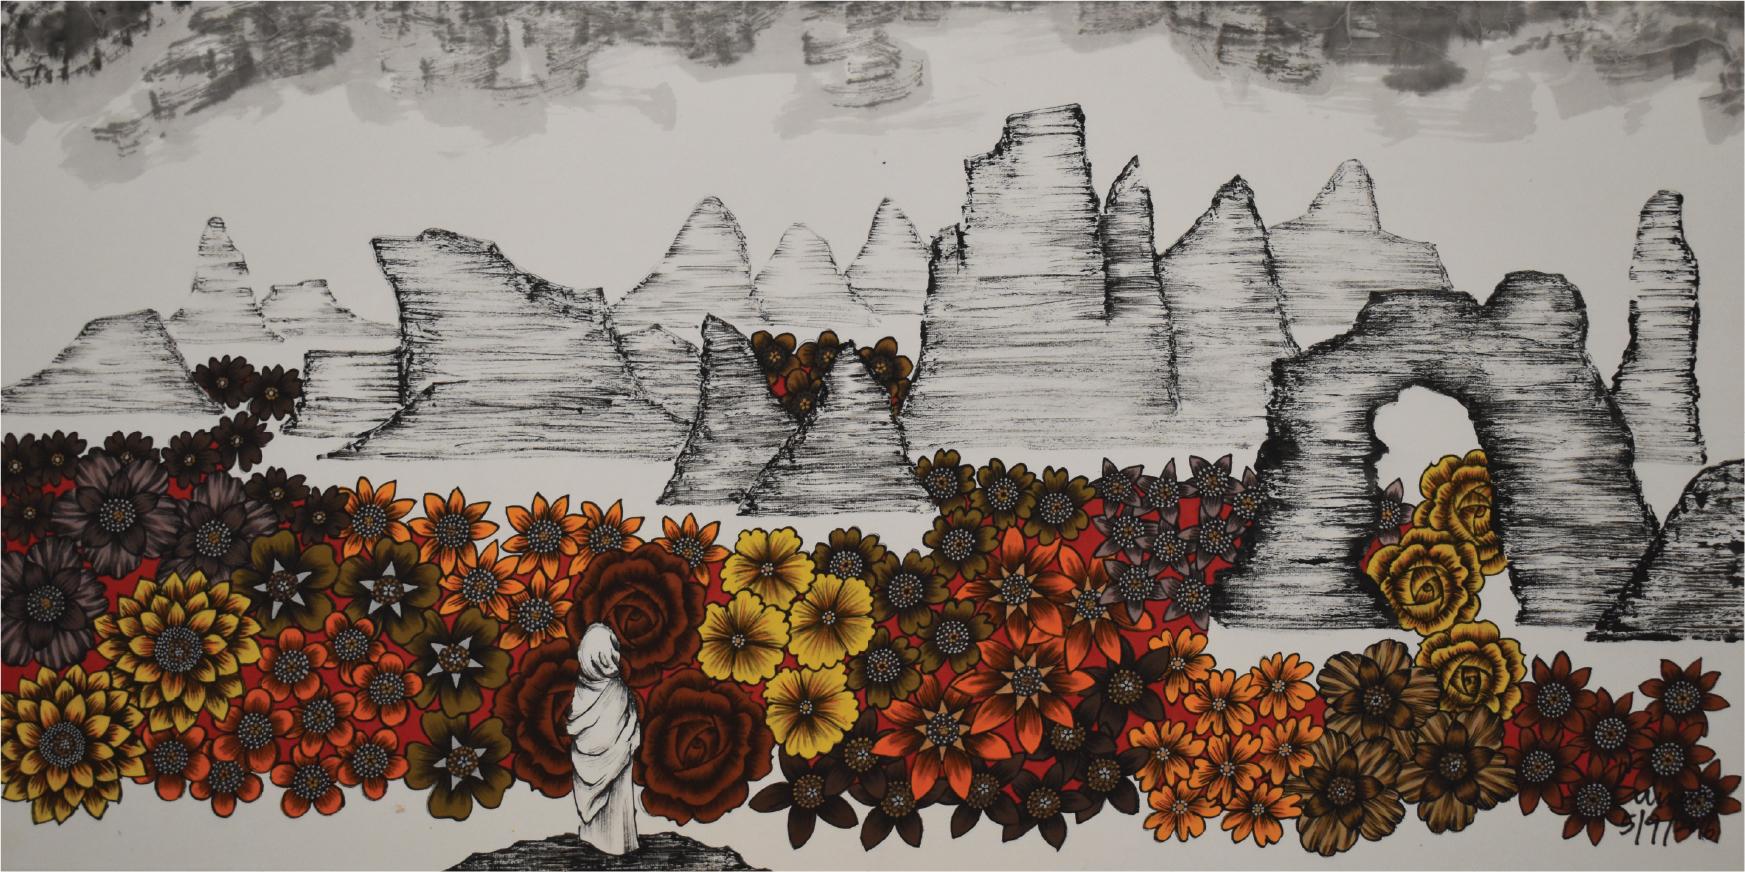 Surrealistic Landscape.Contemporary interpretation of Chinese Ink Painting